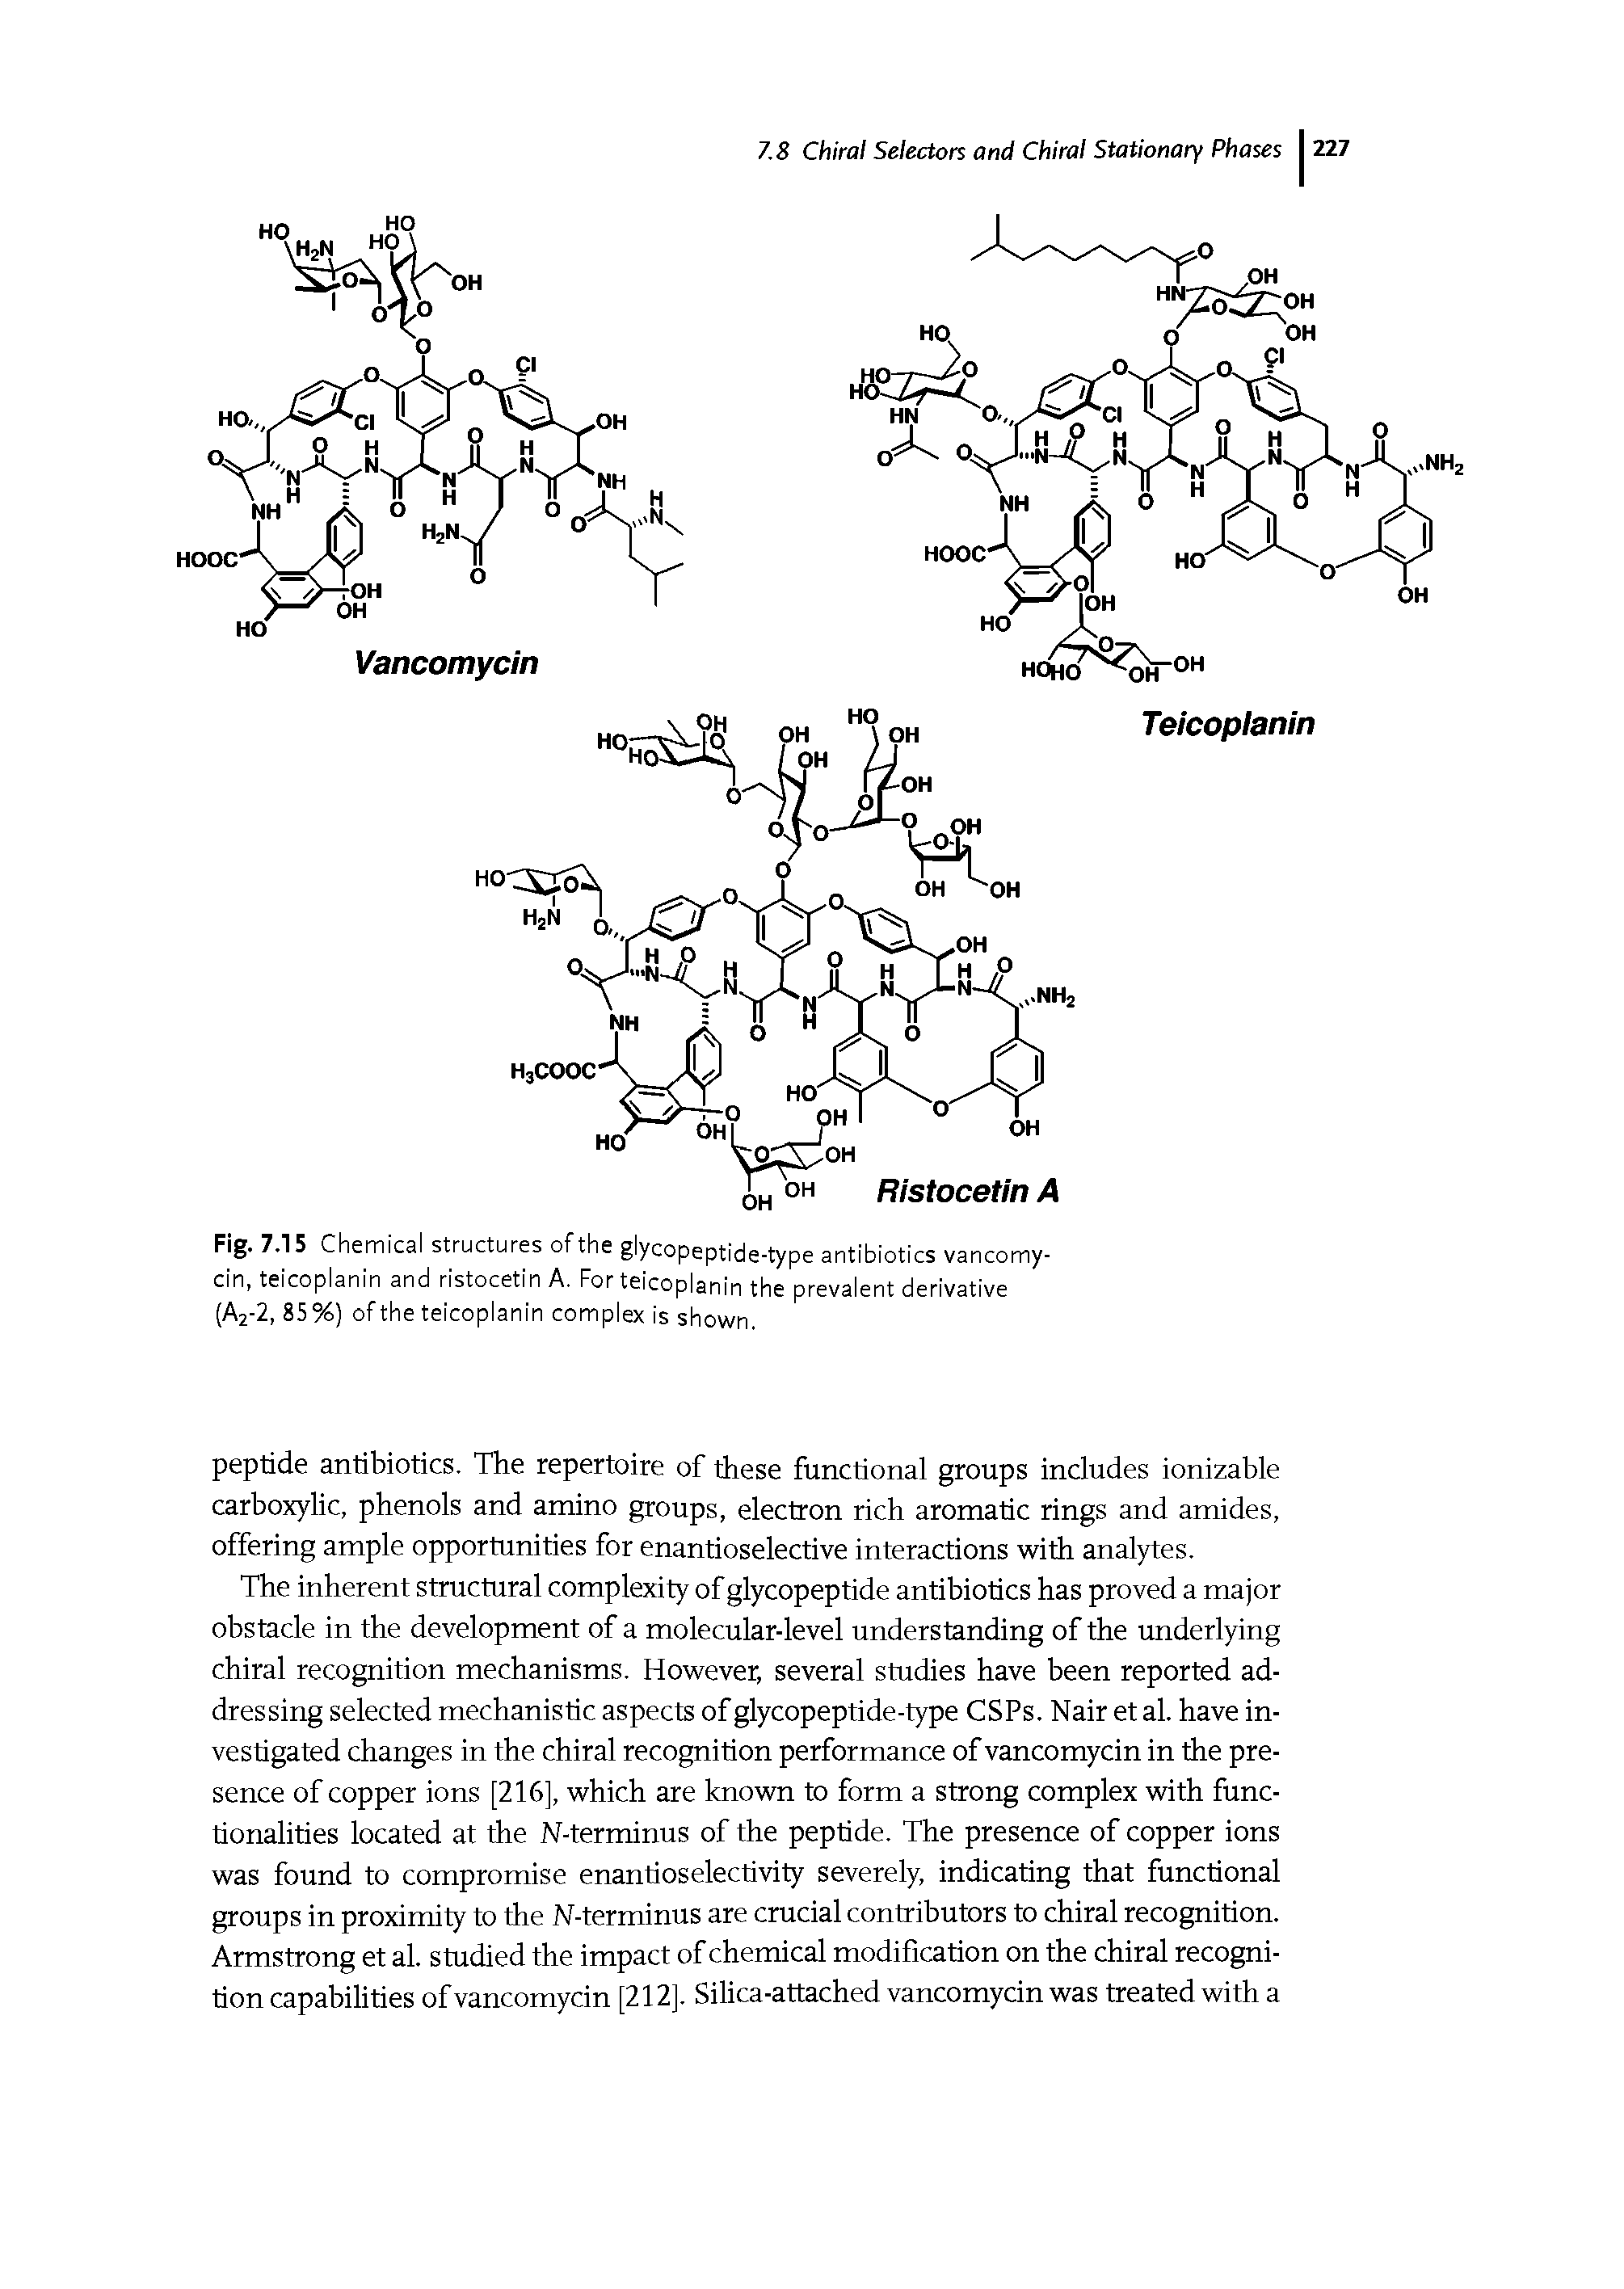 Fig. 7.15 Chemical structures of the glycopeptide-type antibiotics vancomycin, teicoplanin and ristocetin A. For teicoplanin the prevalent derivative (A2-2, 85%) of the teicoplanin complex is shown.